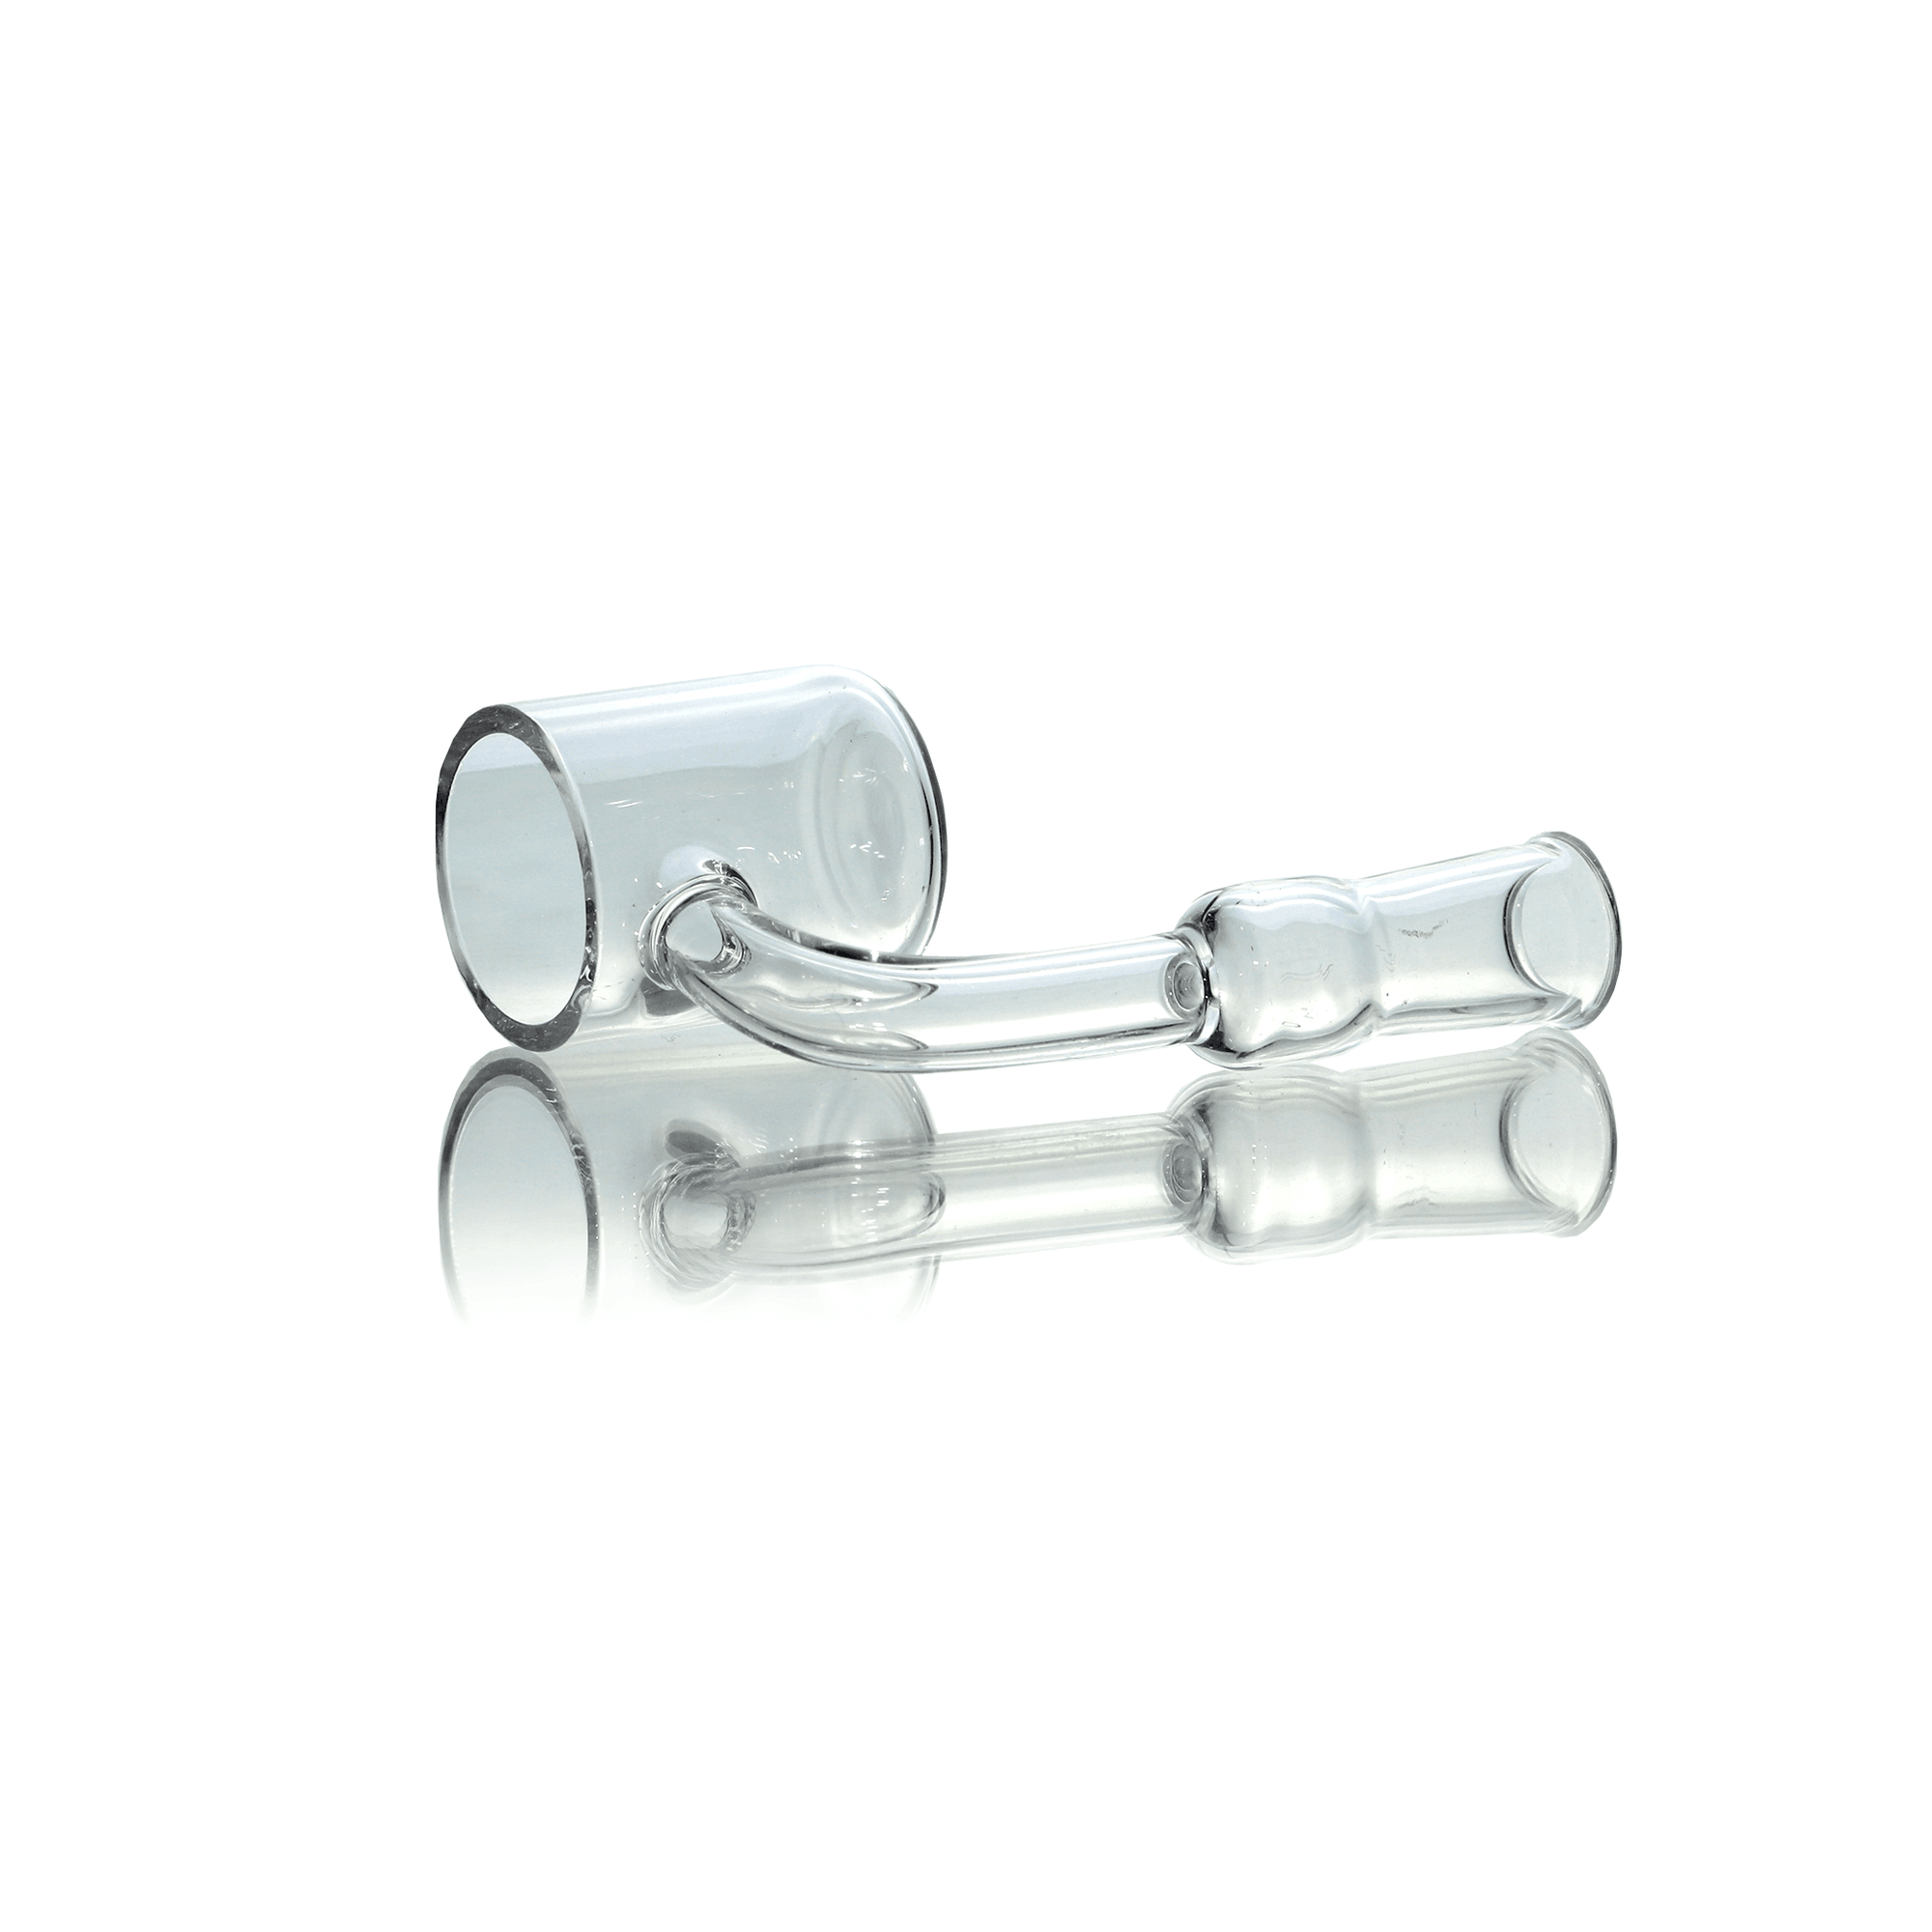 Flat Top Quartz Banger | 10mm Female | Cup Insert and Saucer Cap | Banger Angled Prone View | DW